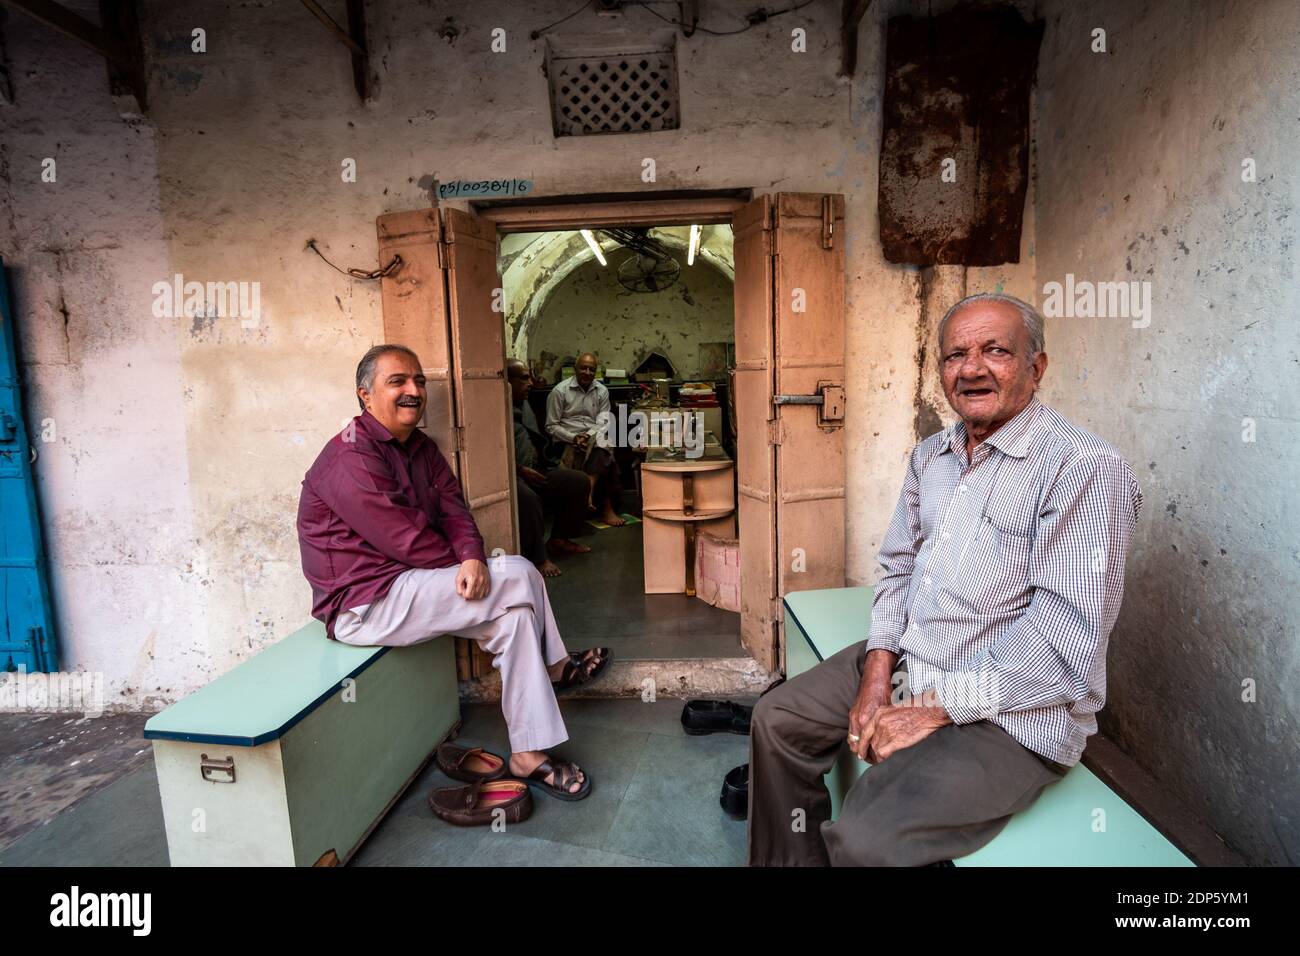 Jamnagar, Gujarat, India - December 2018: Elderly Indian men sitting outside a shop and having a conversation while hanging out. Stock Photo